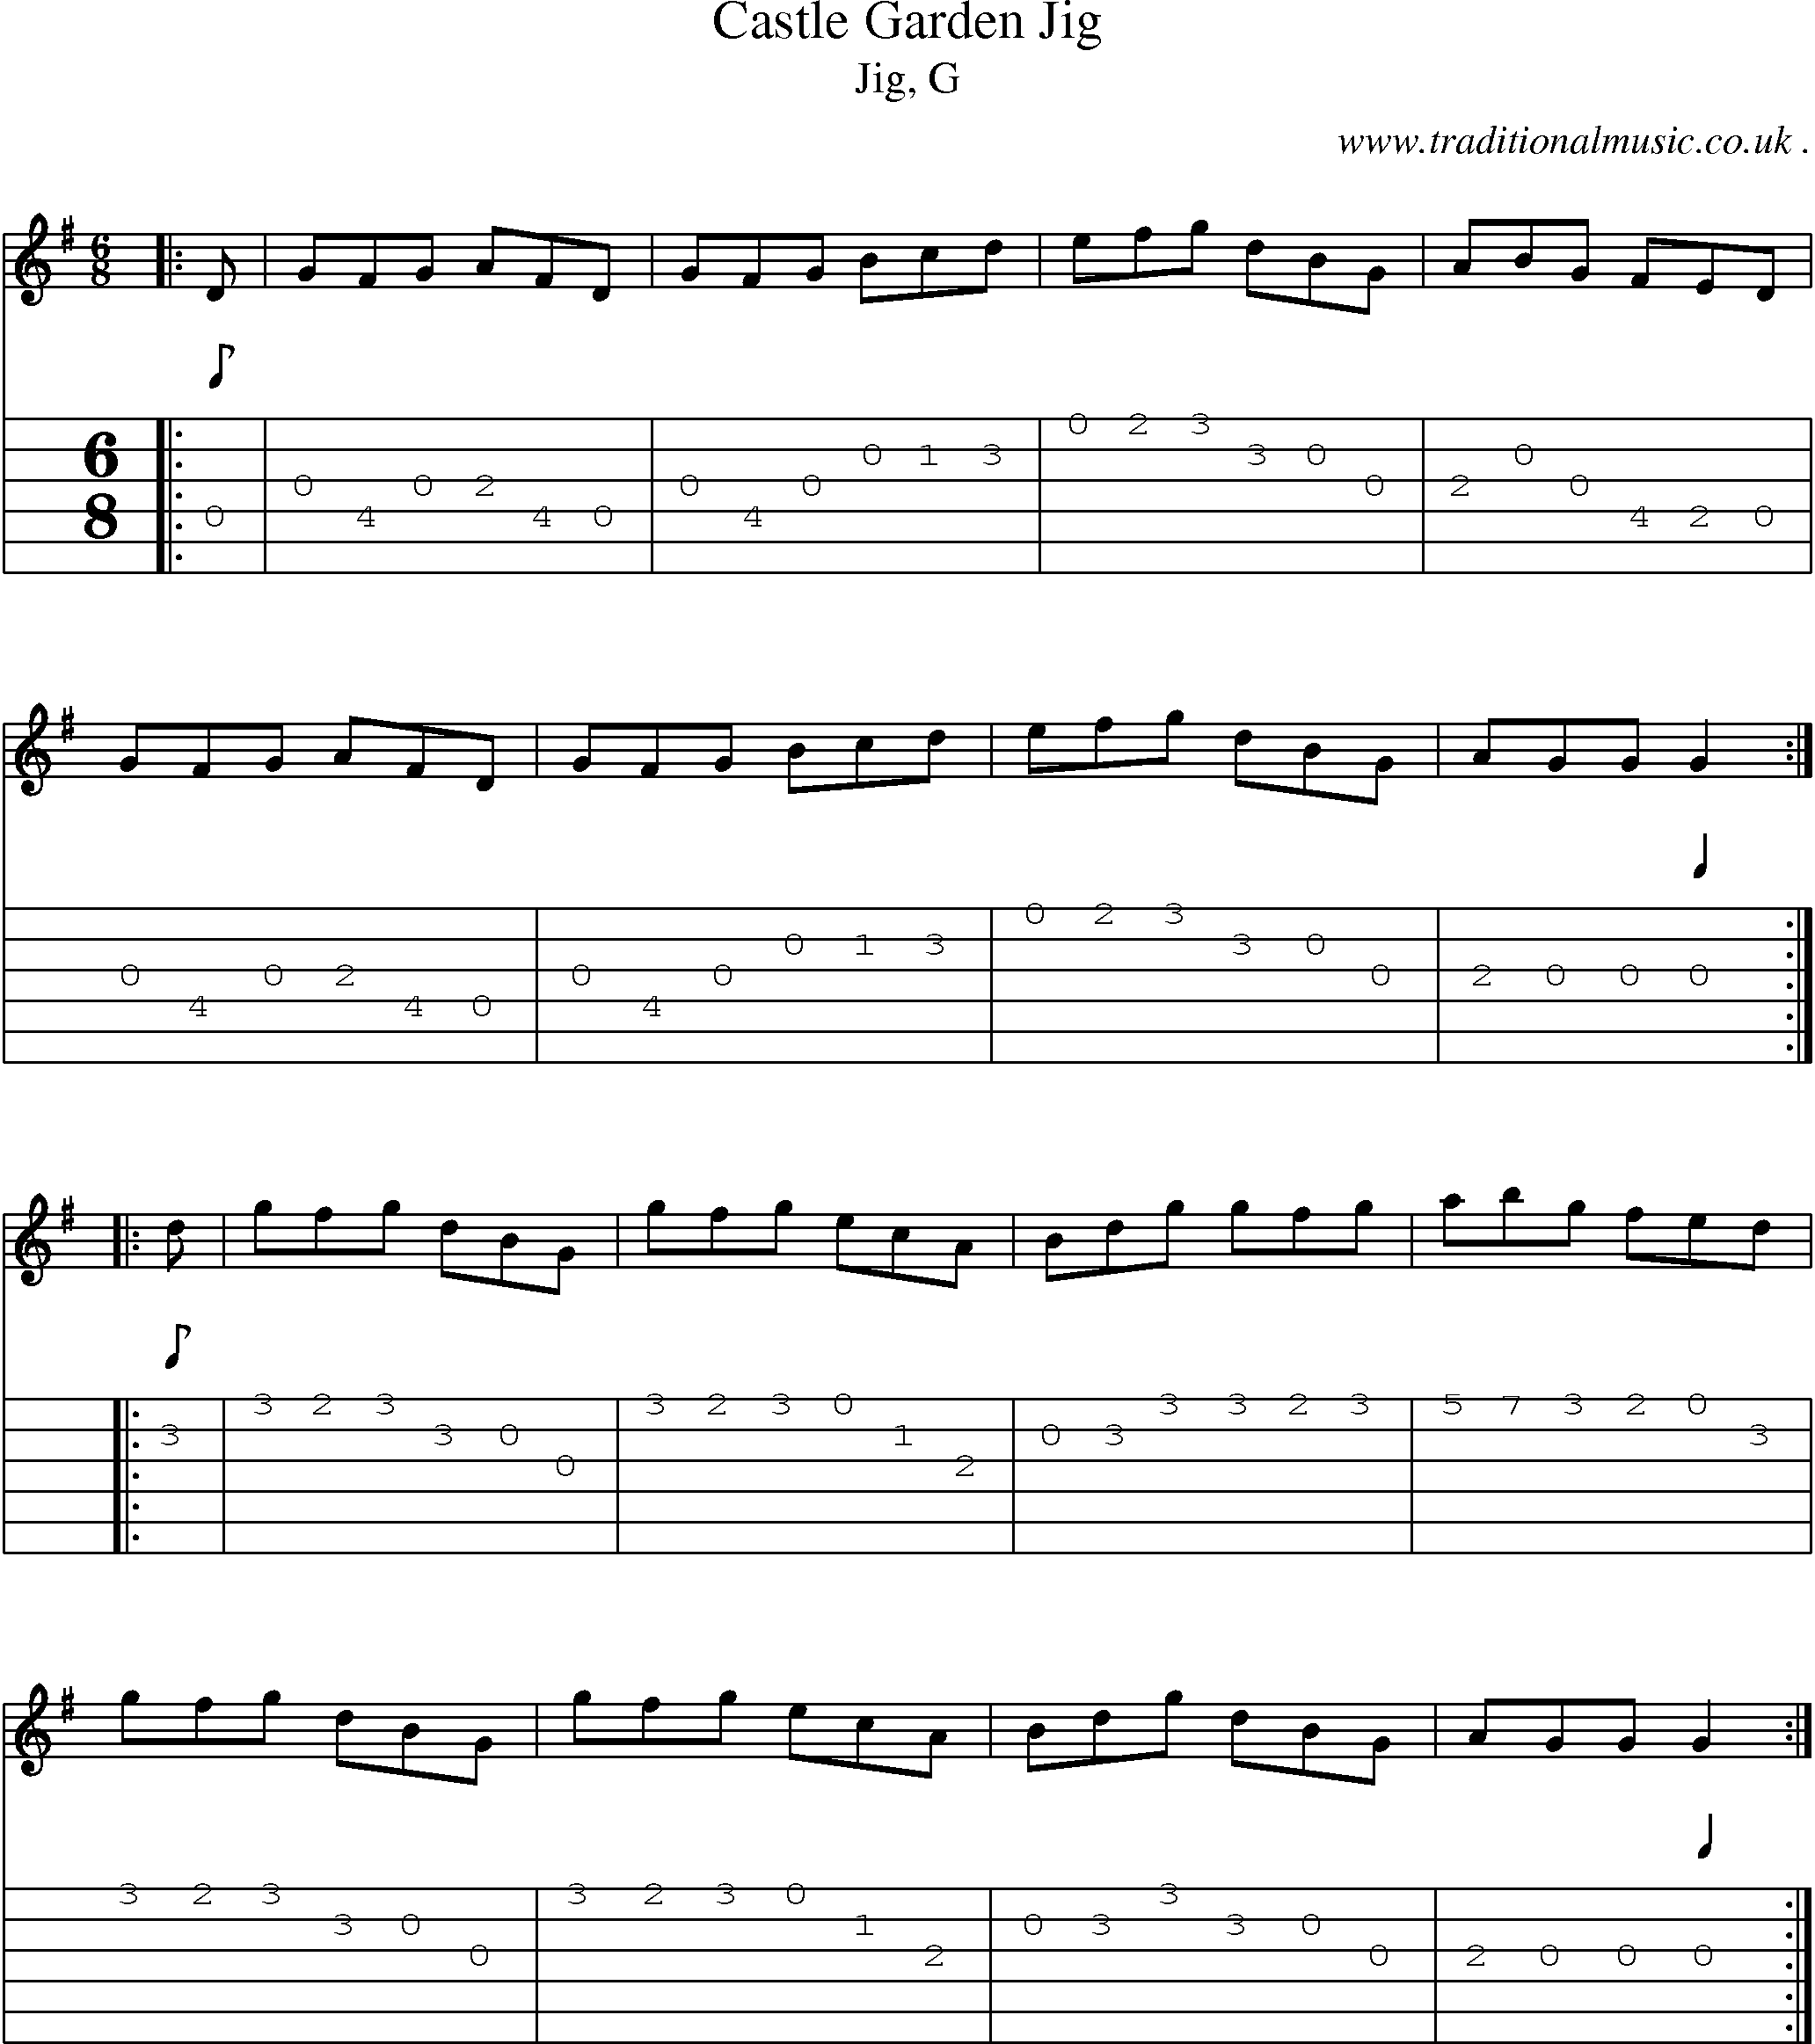 Sheet-music  score, Chords and Guitar Tabs for Castle Garden Jig